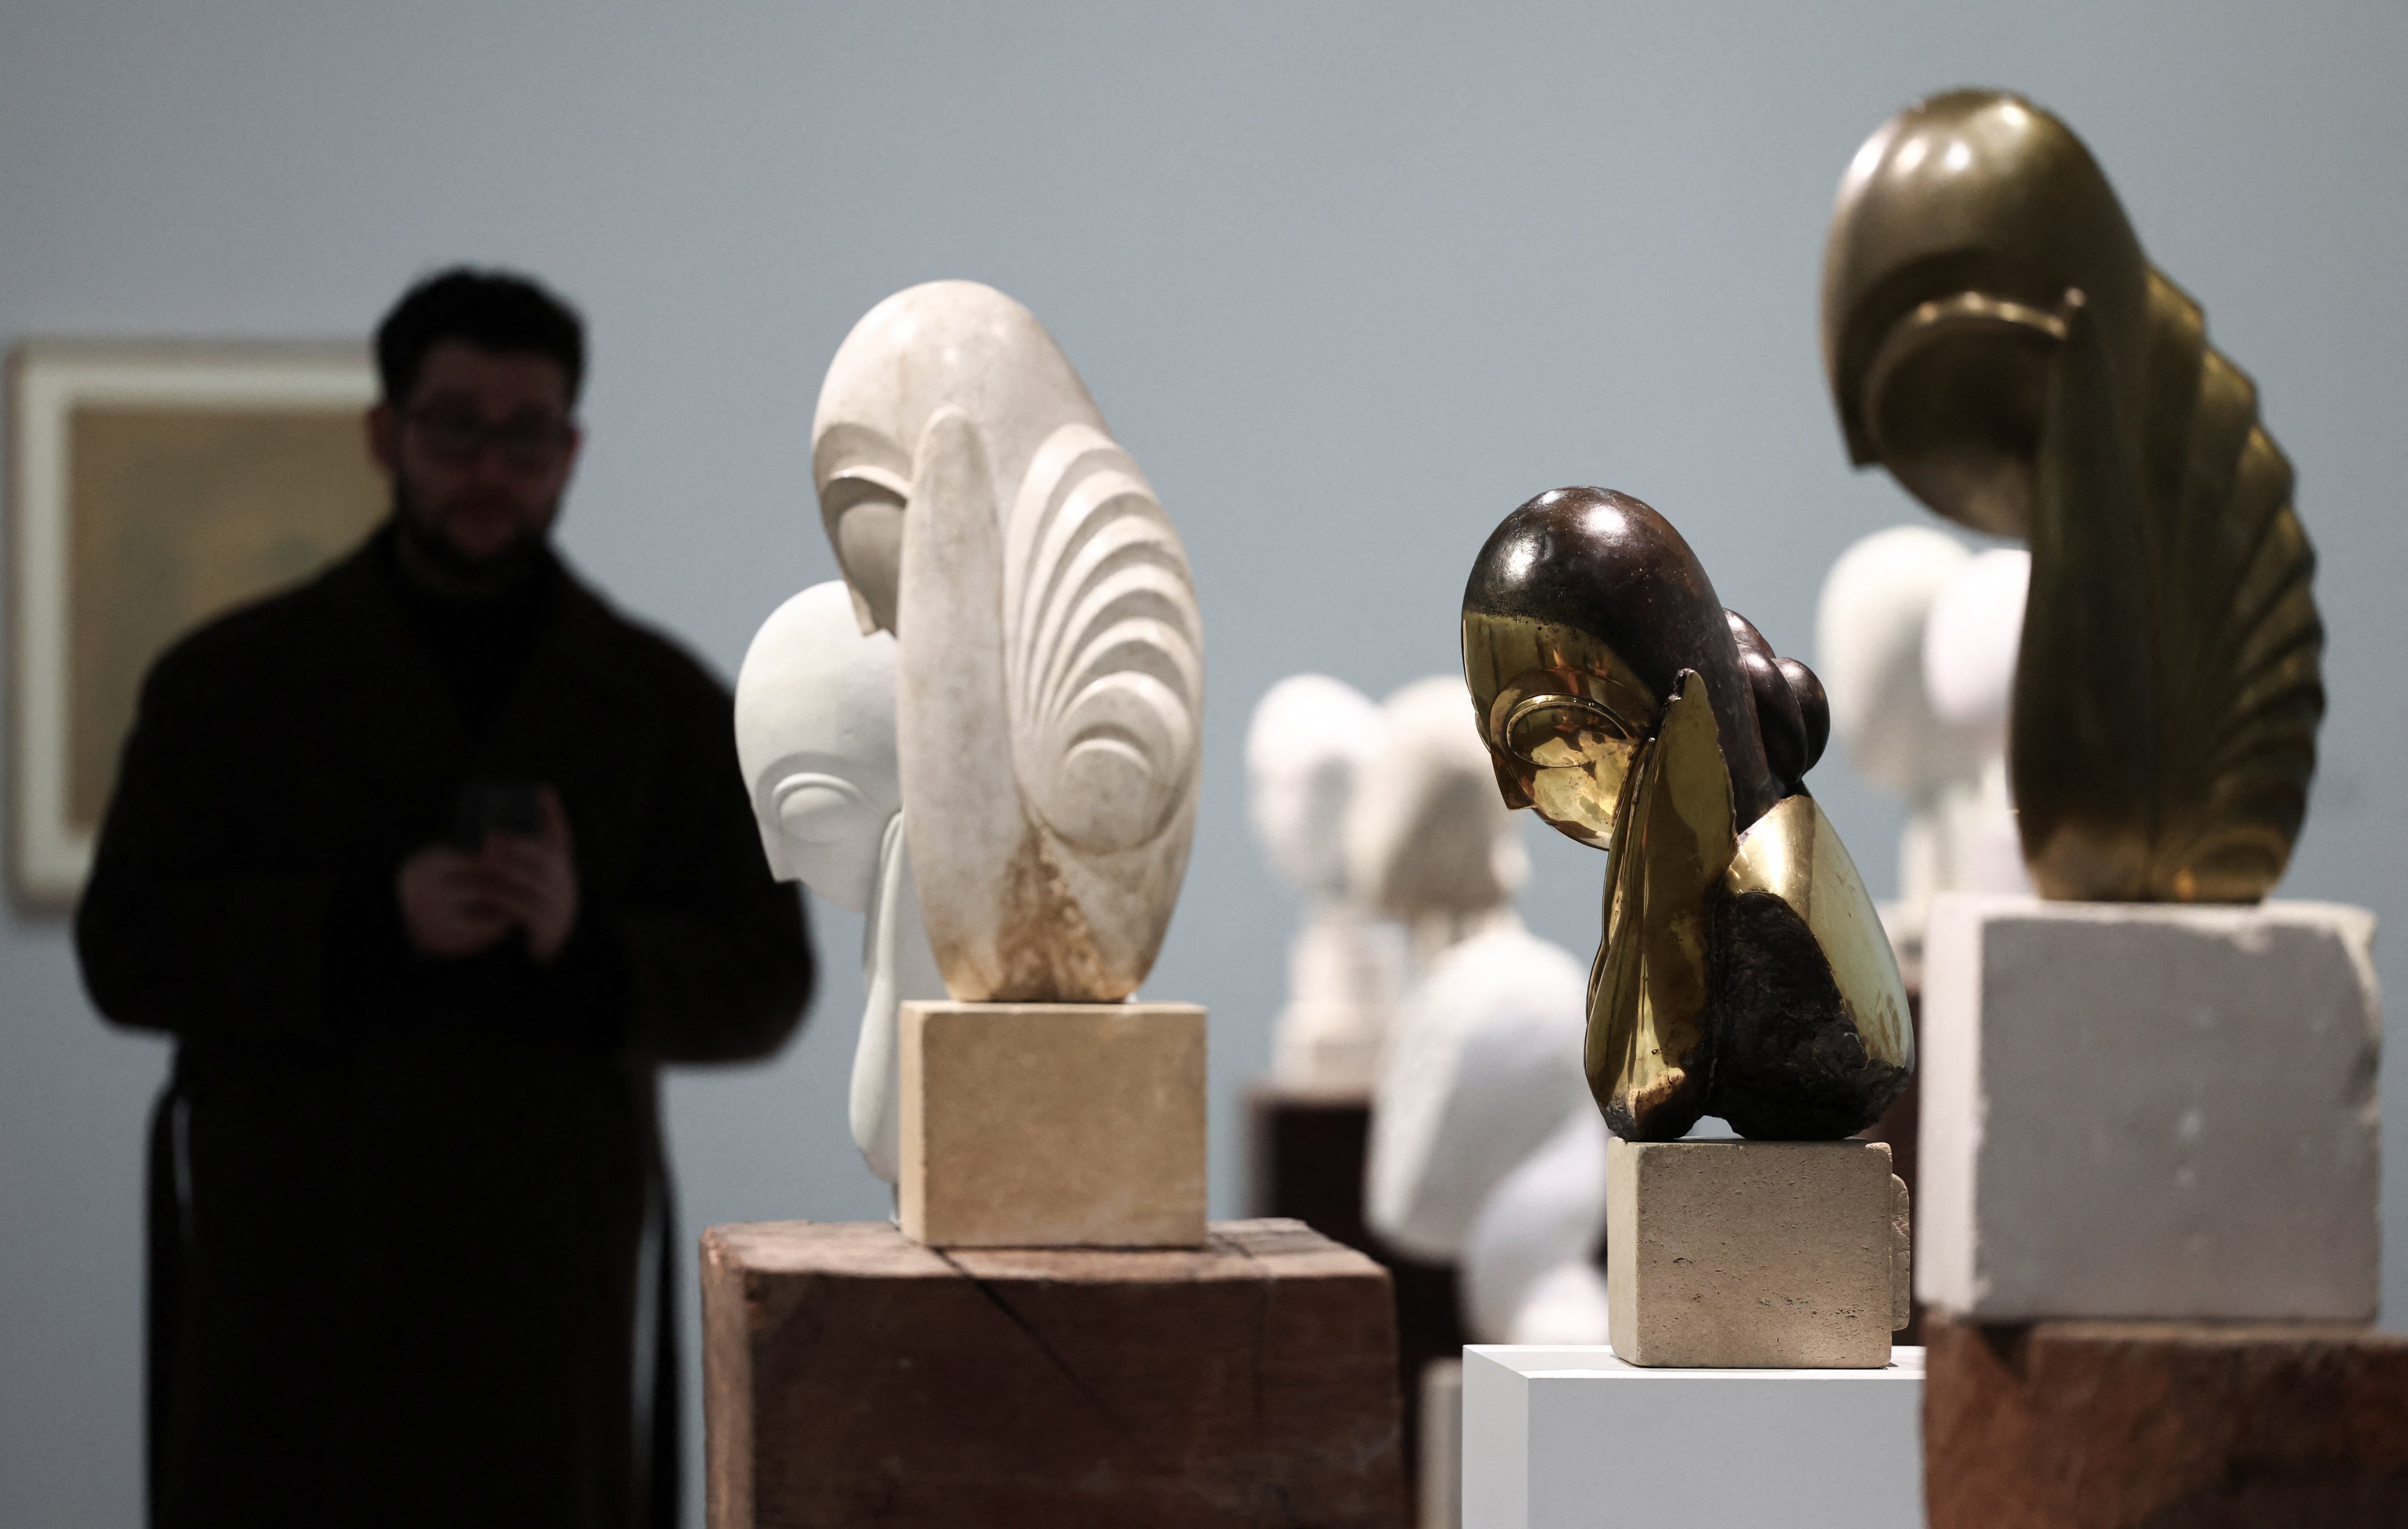 Large exhibitions of Brancusi’s works are rare, as they cost huge sums to insure